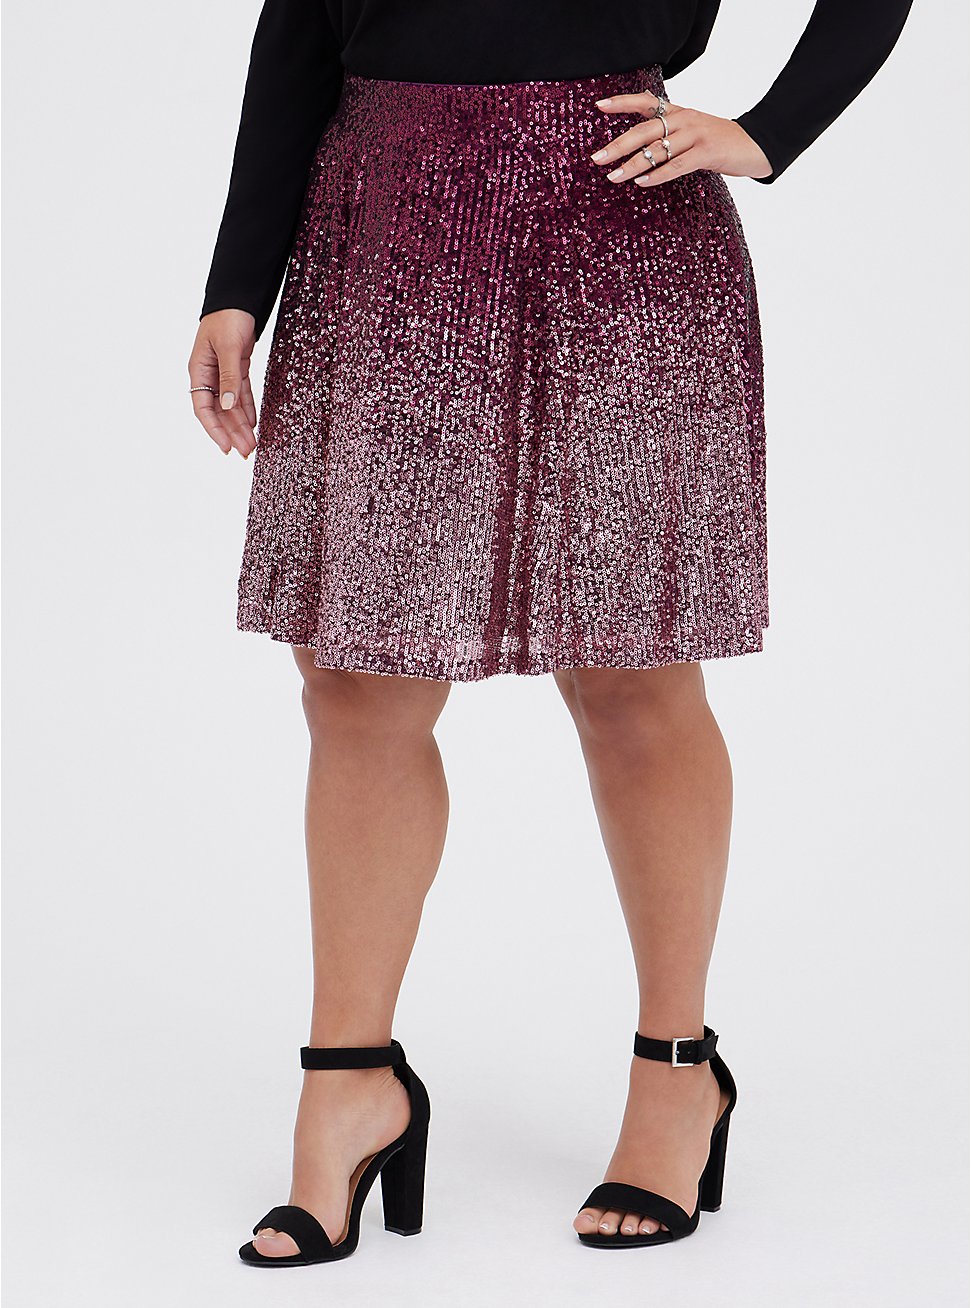 Plus Size Sequin Pleated Mini Skirt - Ombre Burgundy & Pink , MULTI, hi-res